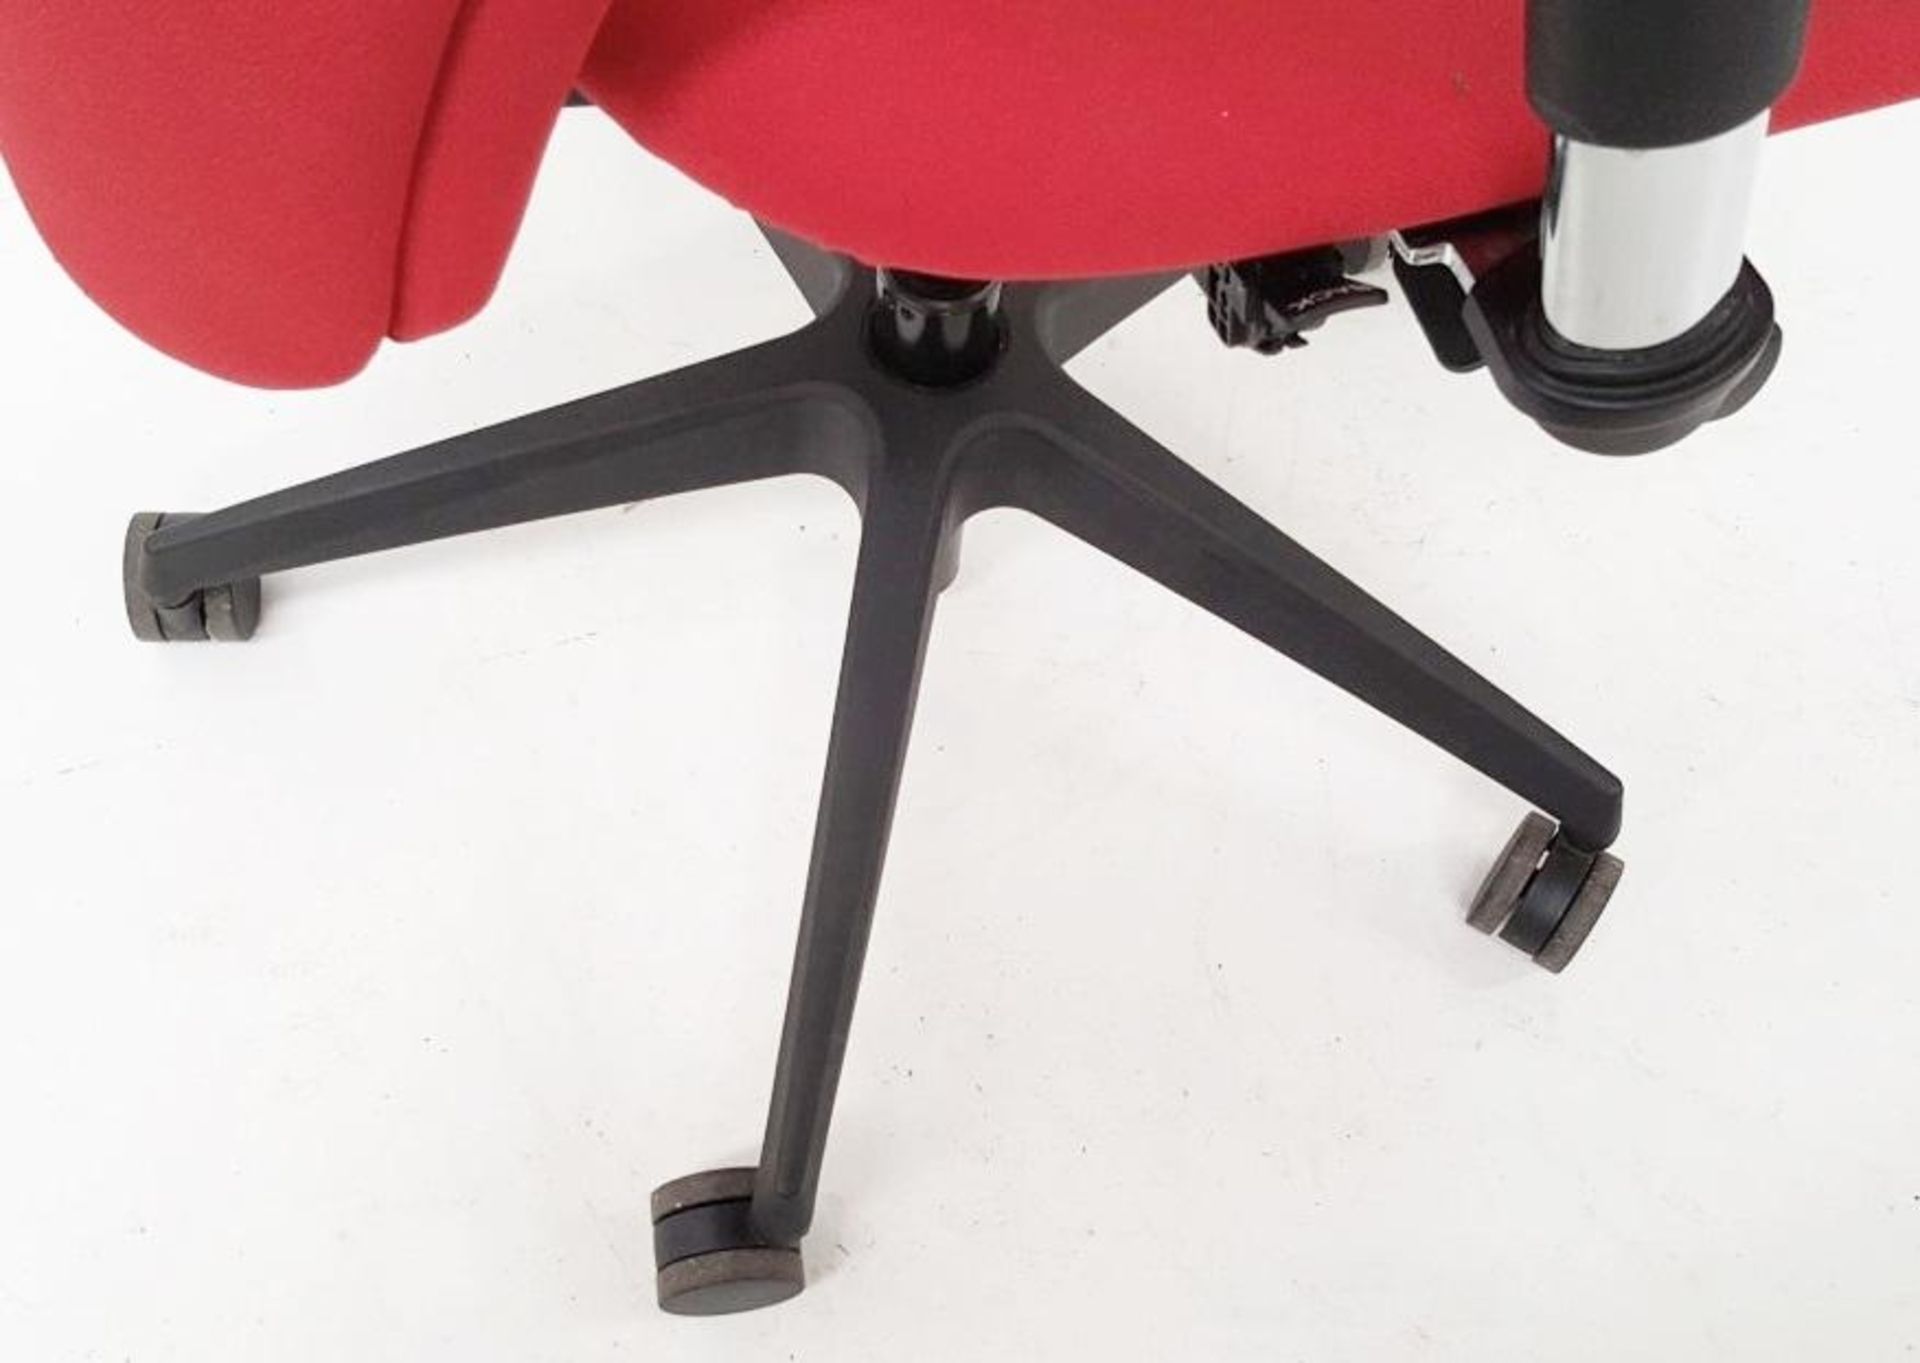 A Pair Of LIMA Branded Premium Adjustable Office Chairs Featuring Fixed Lumbar Support And Arm Rests - Image 7 of 7